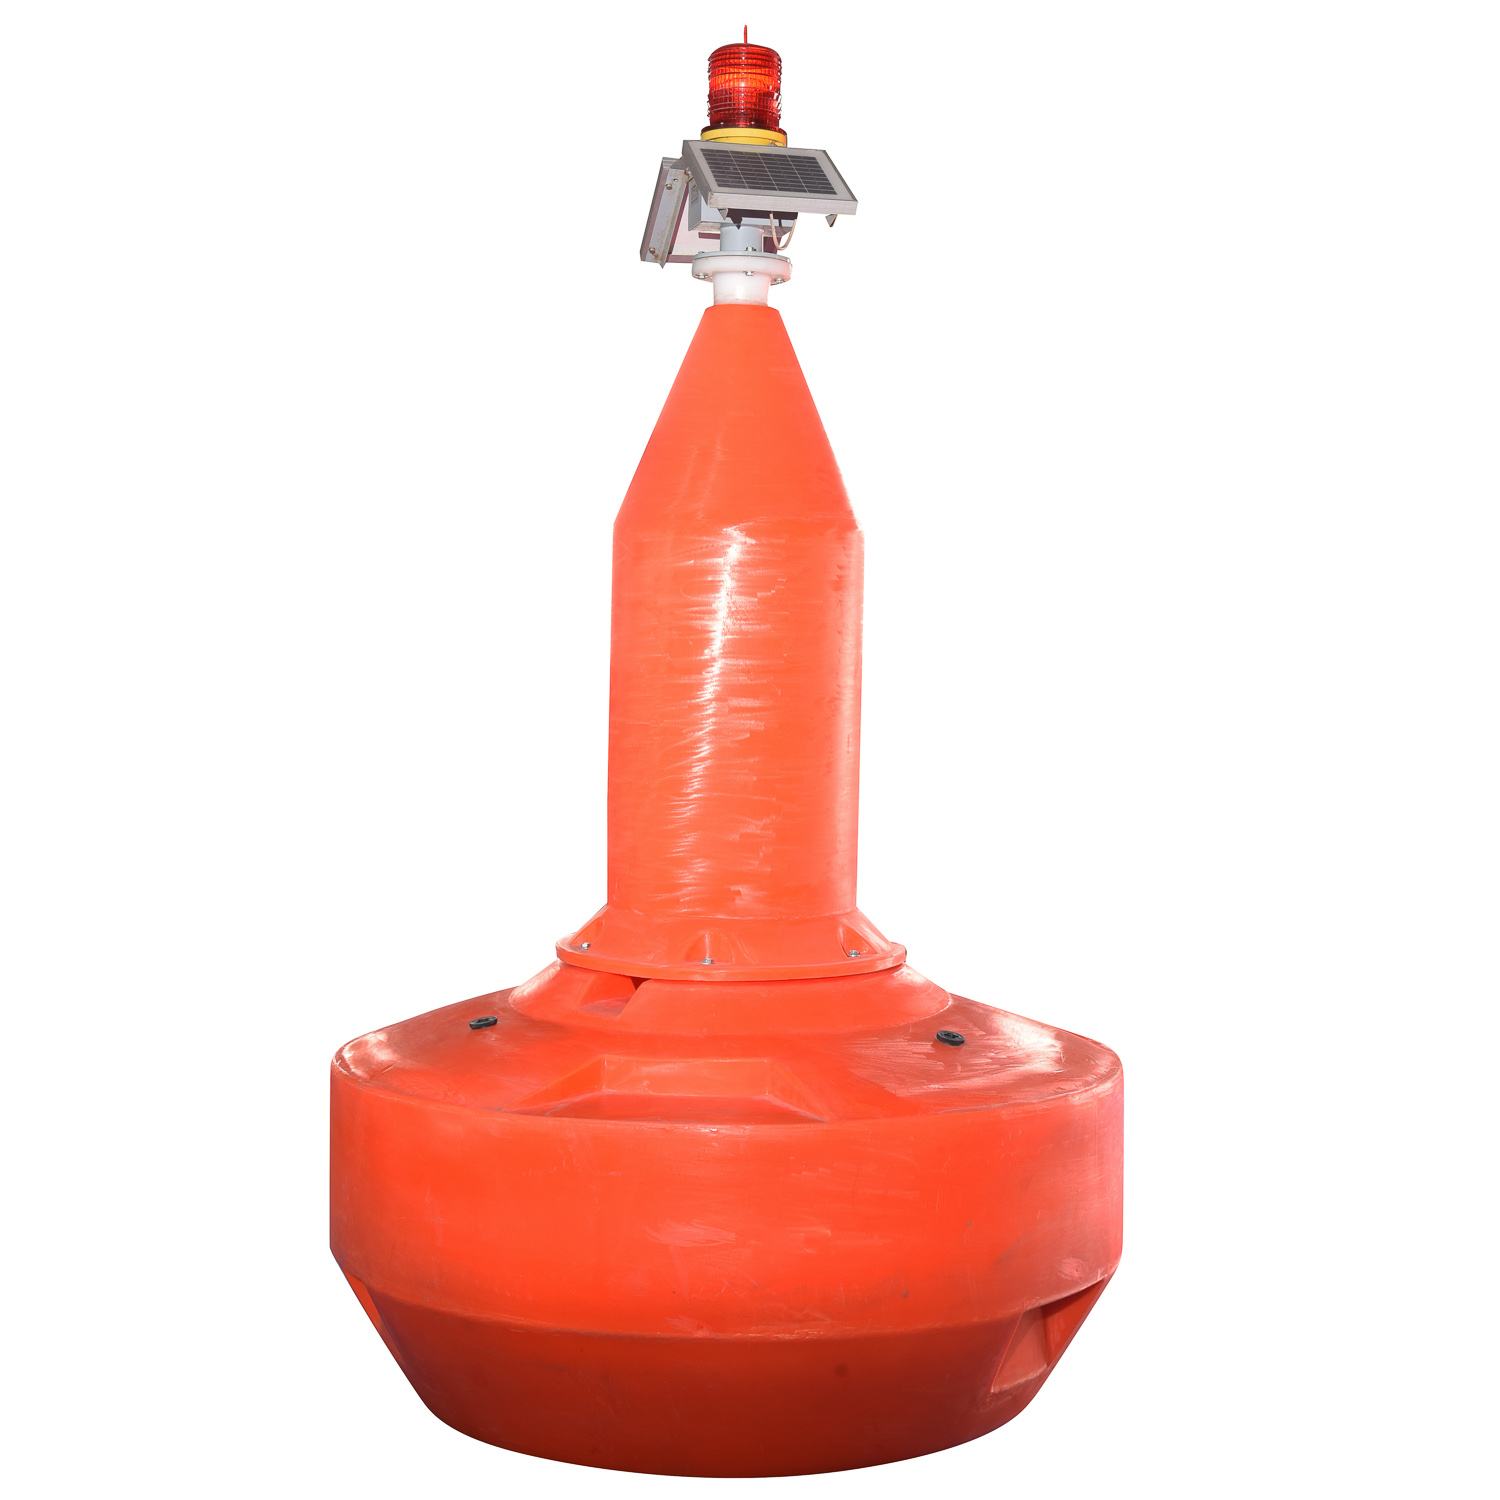 Rotational moulding HDPE Environment products gps bouys float with solar light for marine boat navigation marker buoy